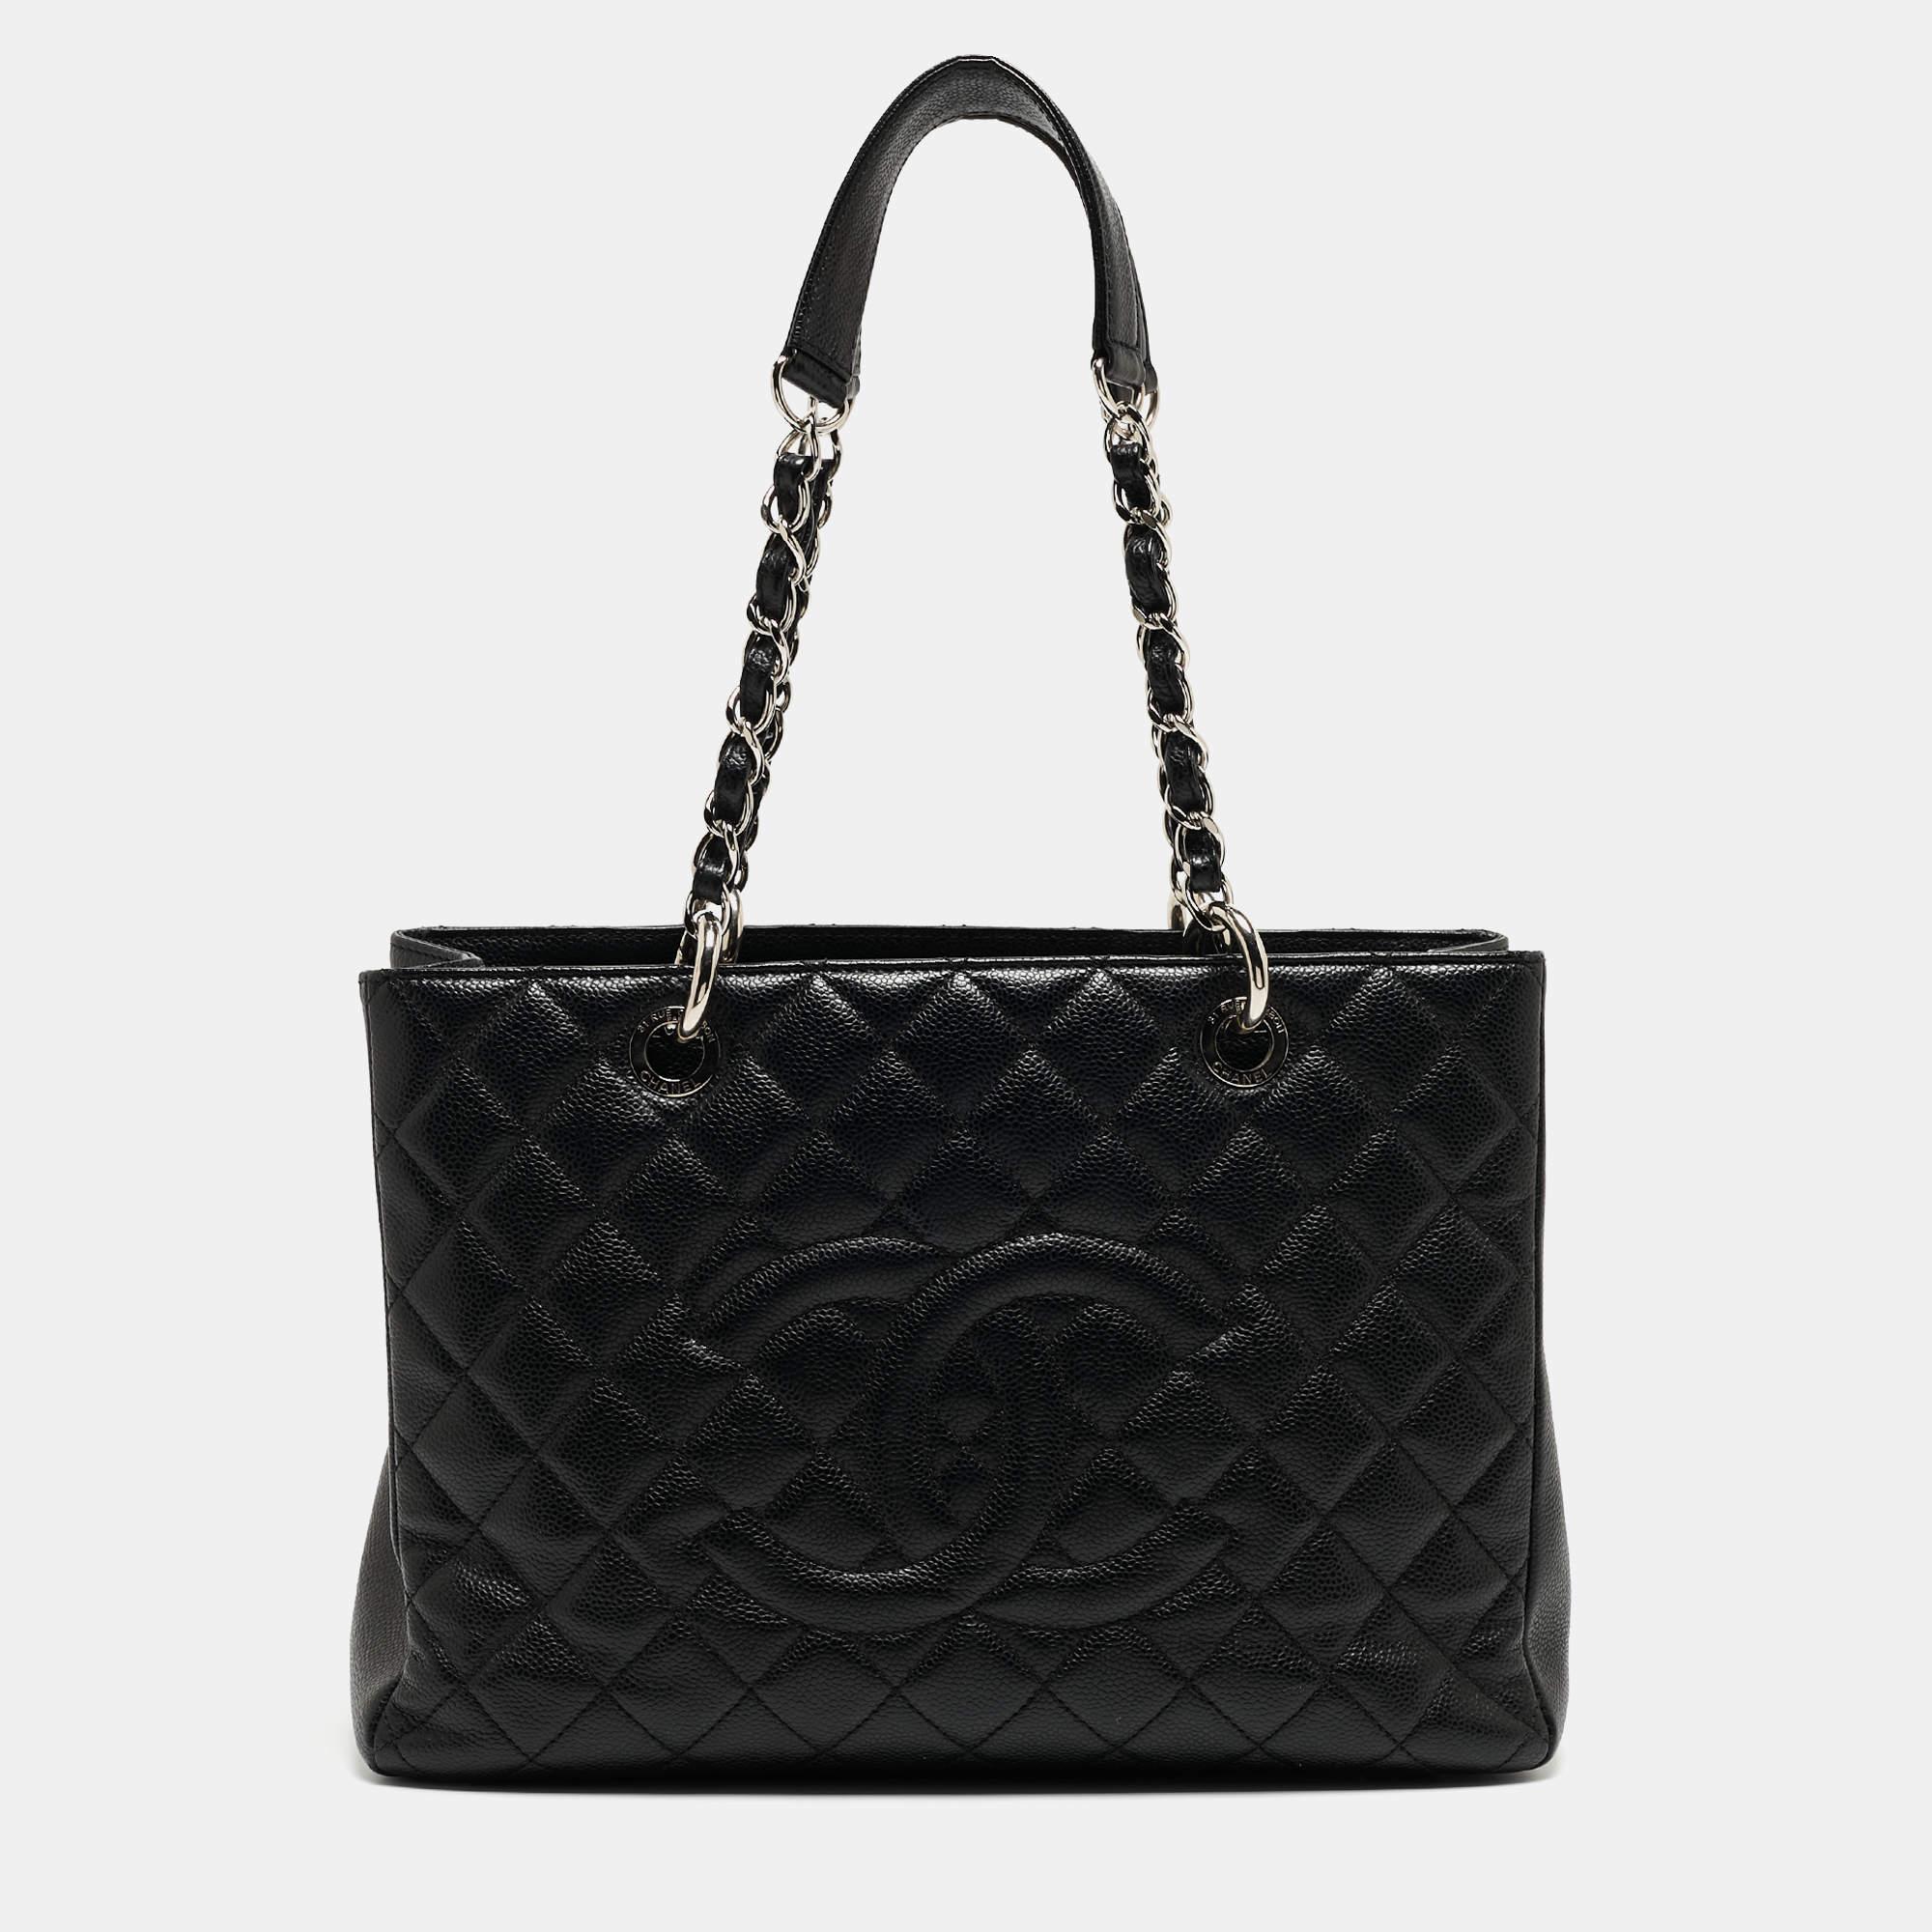 Chanel Black Quilted Caviar Leather Grand Shopper Tote 12